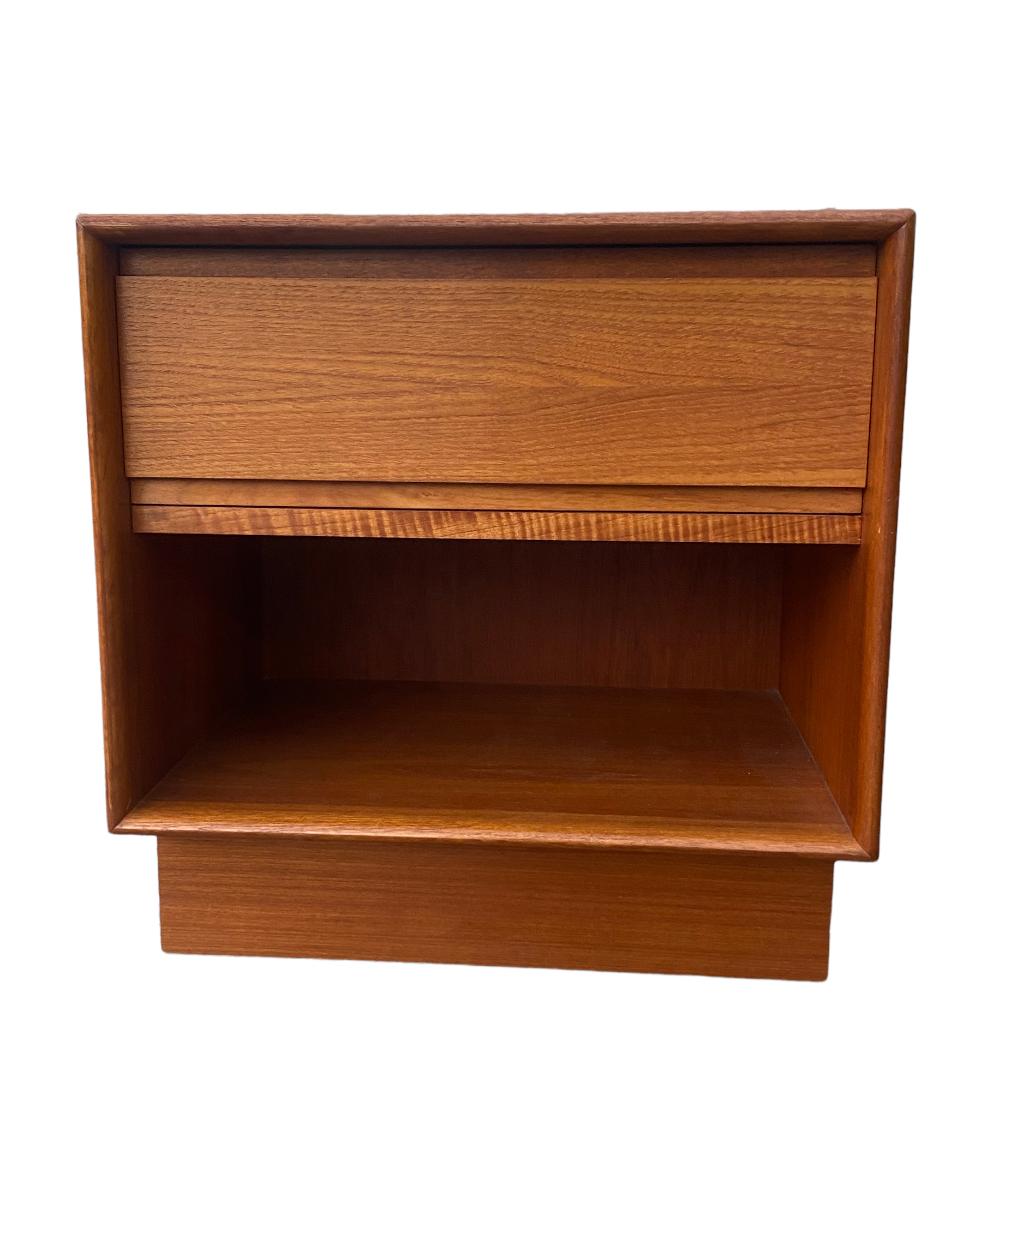 Beautiful pair of Danish modern nightstands. Executed in vibrant teak. Simple, functional design, with spacious drawer and cabinet upon plinth base. In good vintage condition. Surfaces have been cleaned and oiled. Drawers function smoothly.